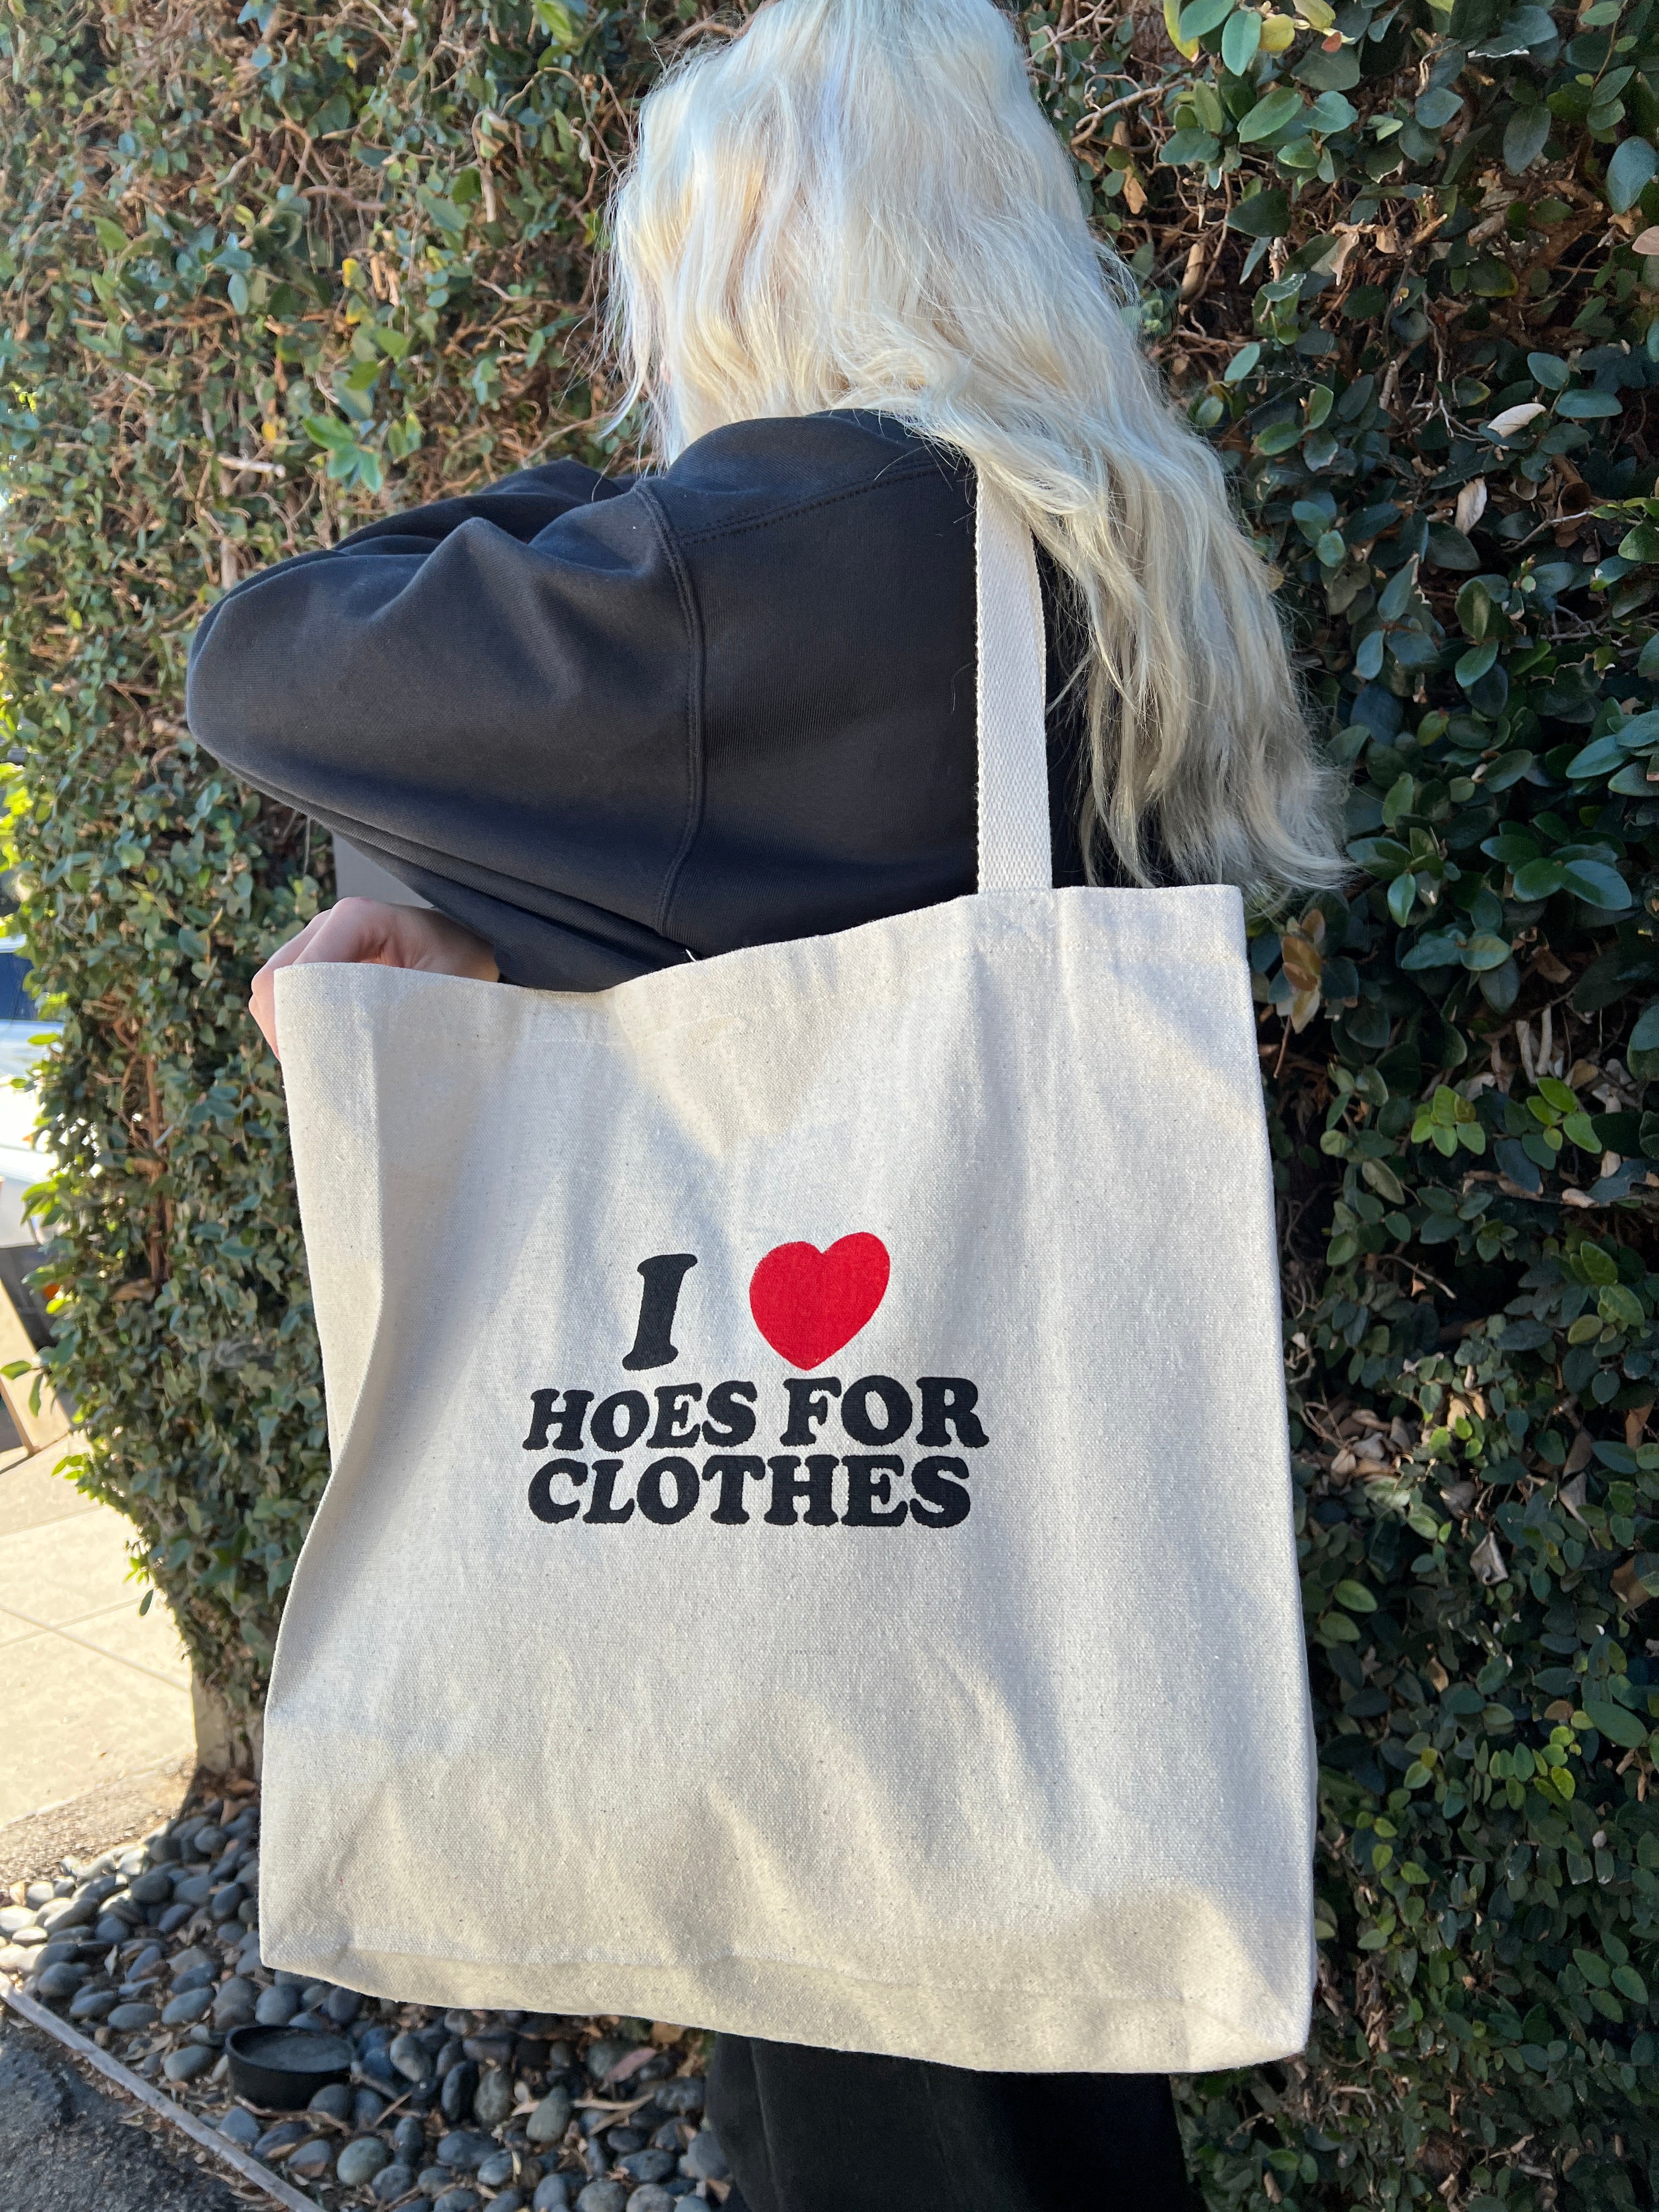 I HEART HOESFORCLOTHES Tote